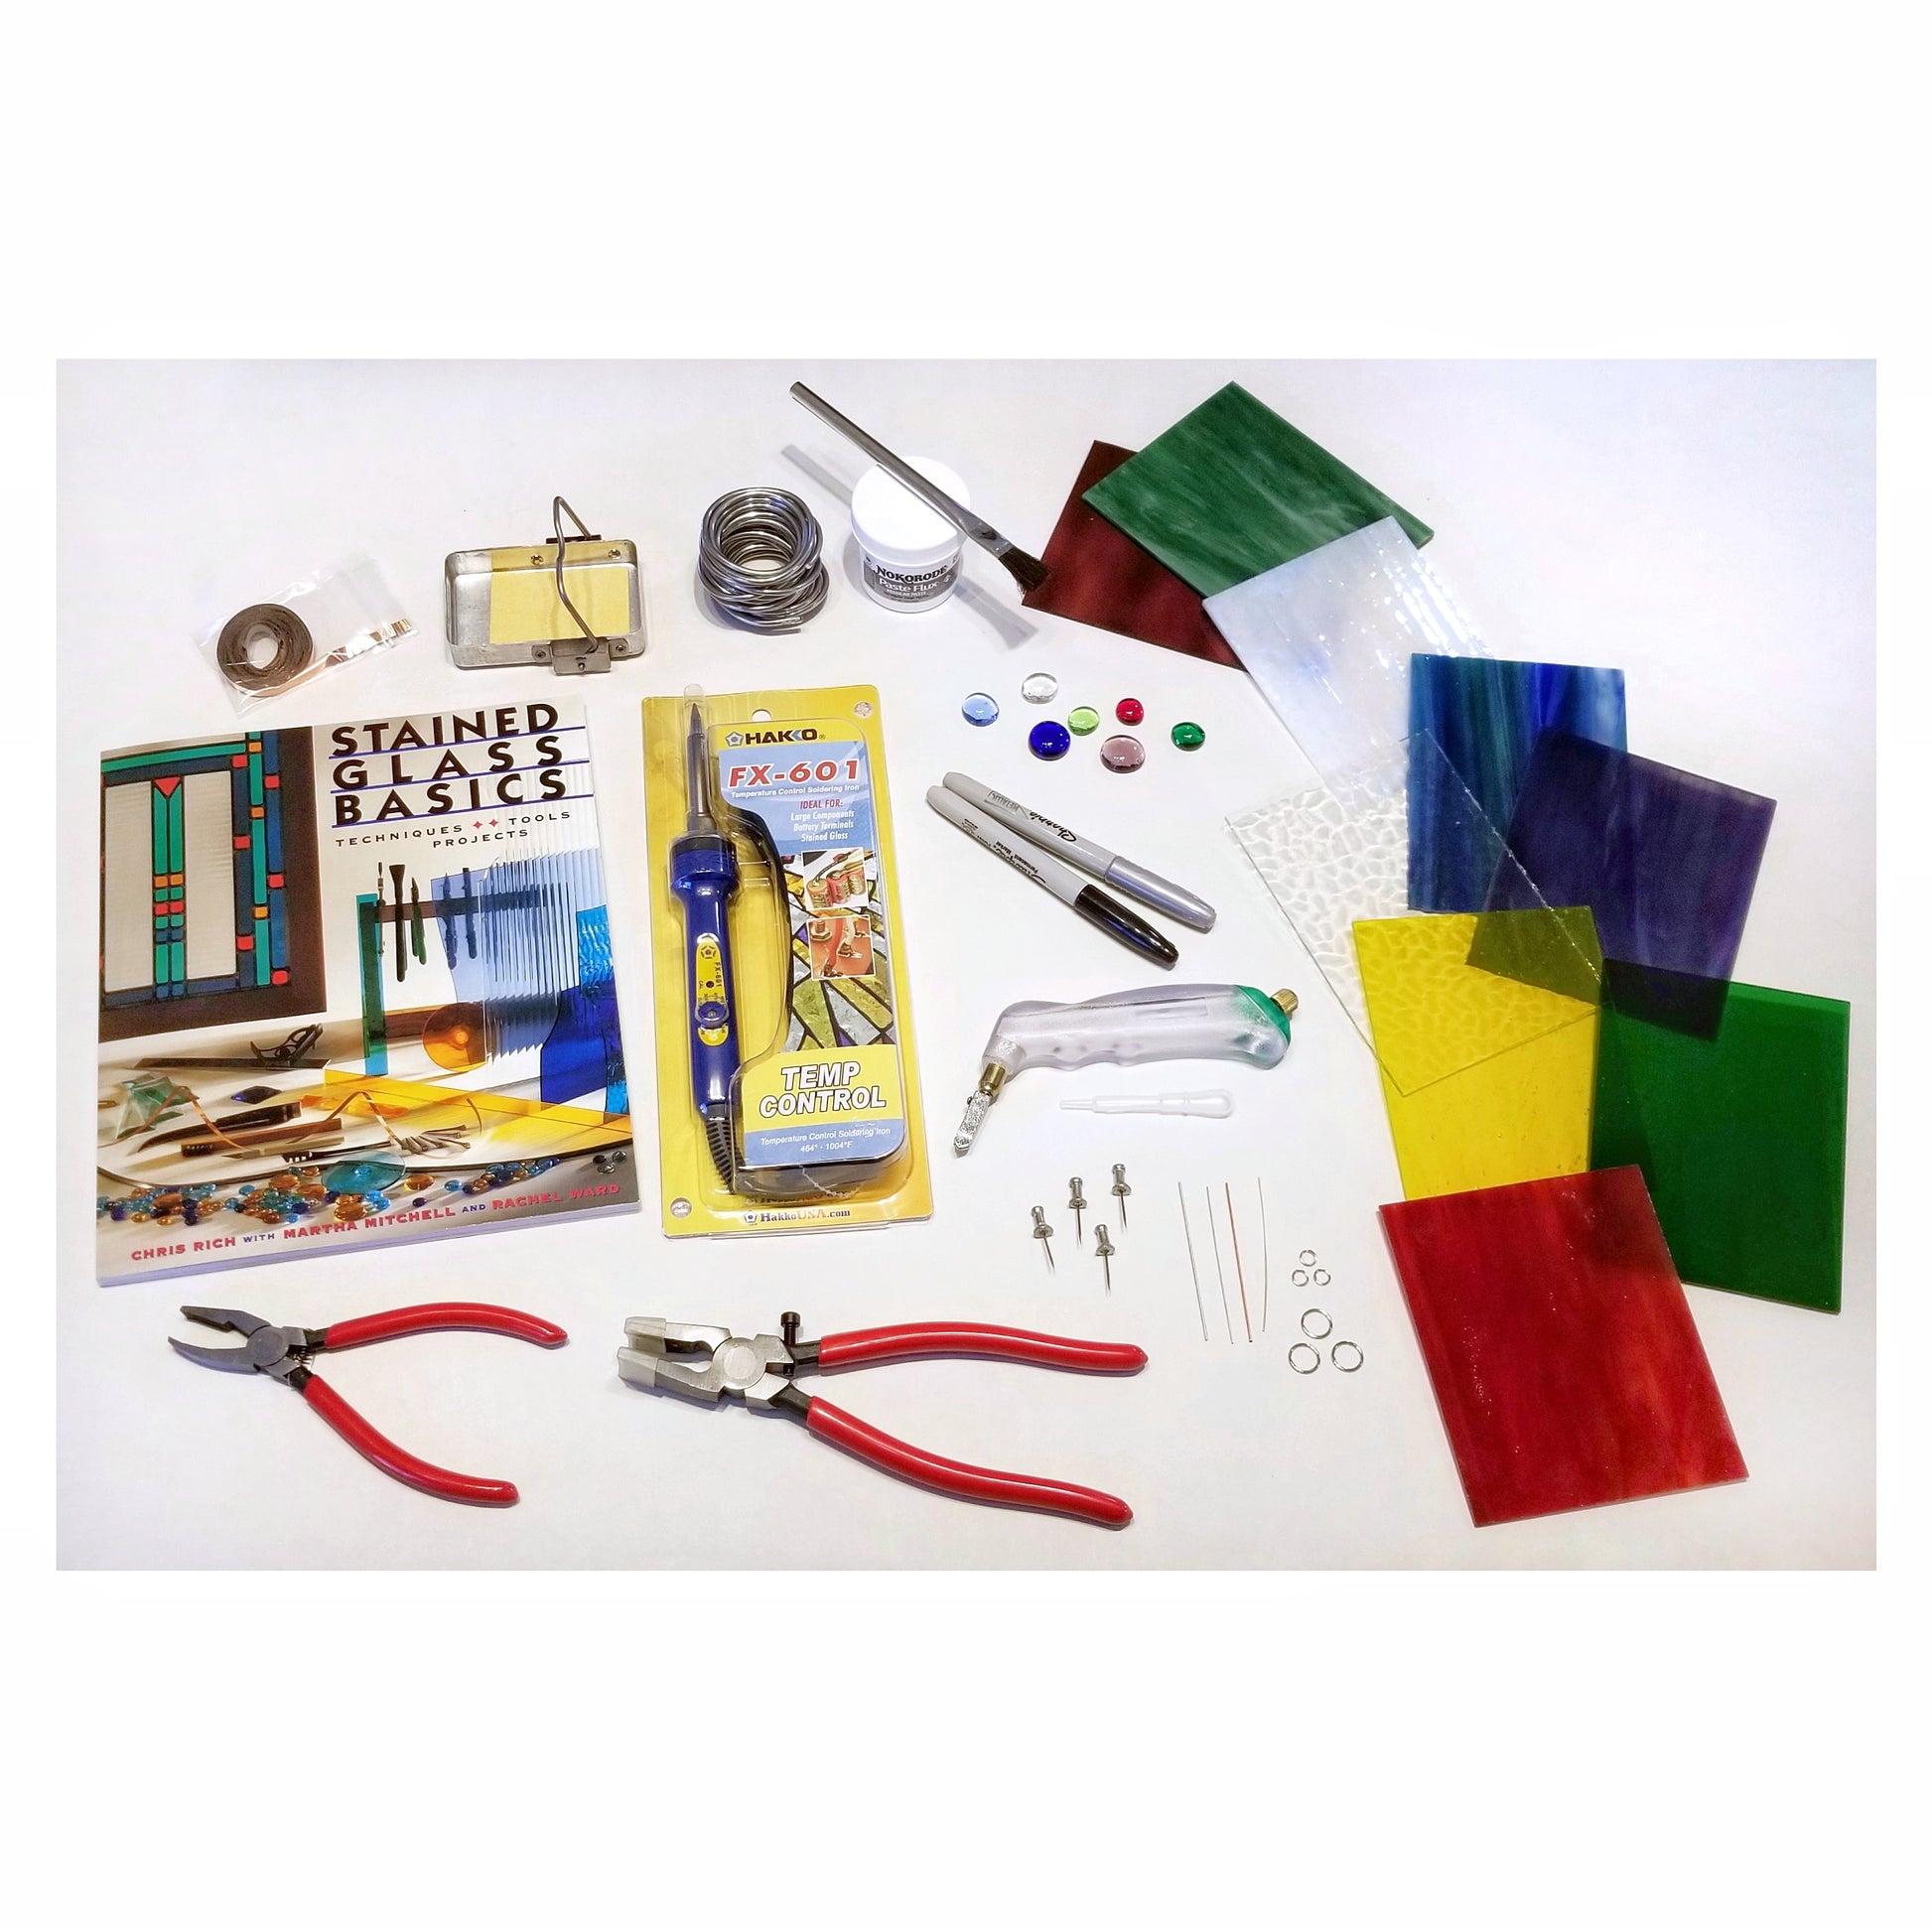 Premium Stained Glass Start-Up Kit,5/8 & 1 Grinder Bits,Includes Glass  Grinder,Circle Cutter Tools,Lead Came Kit For Beginner Tools,Mini Diy